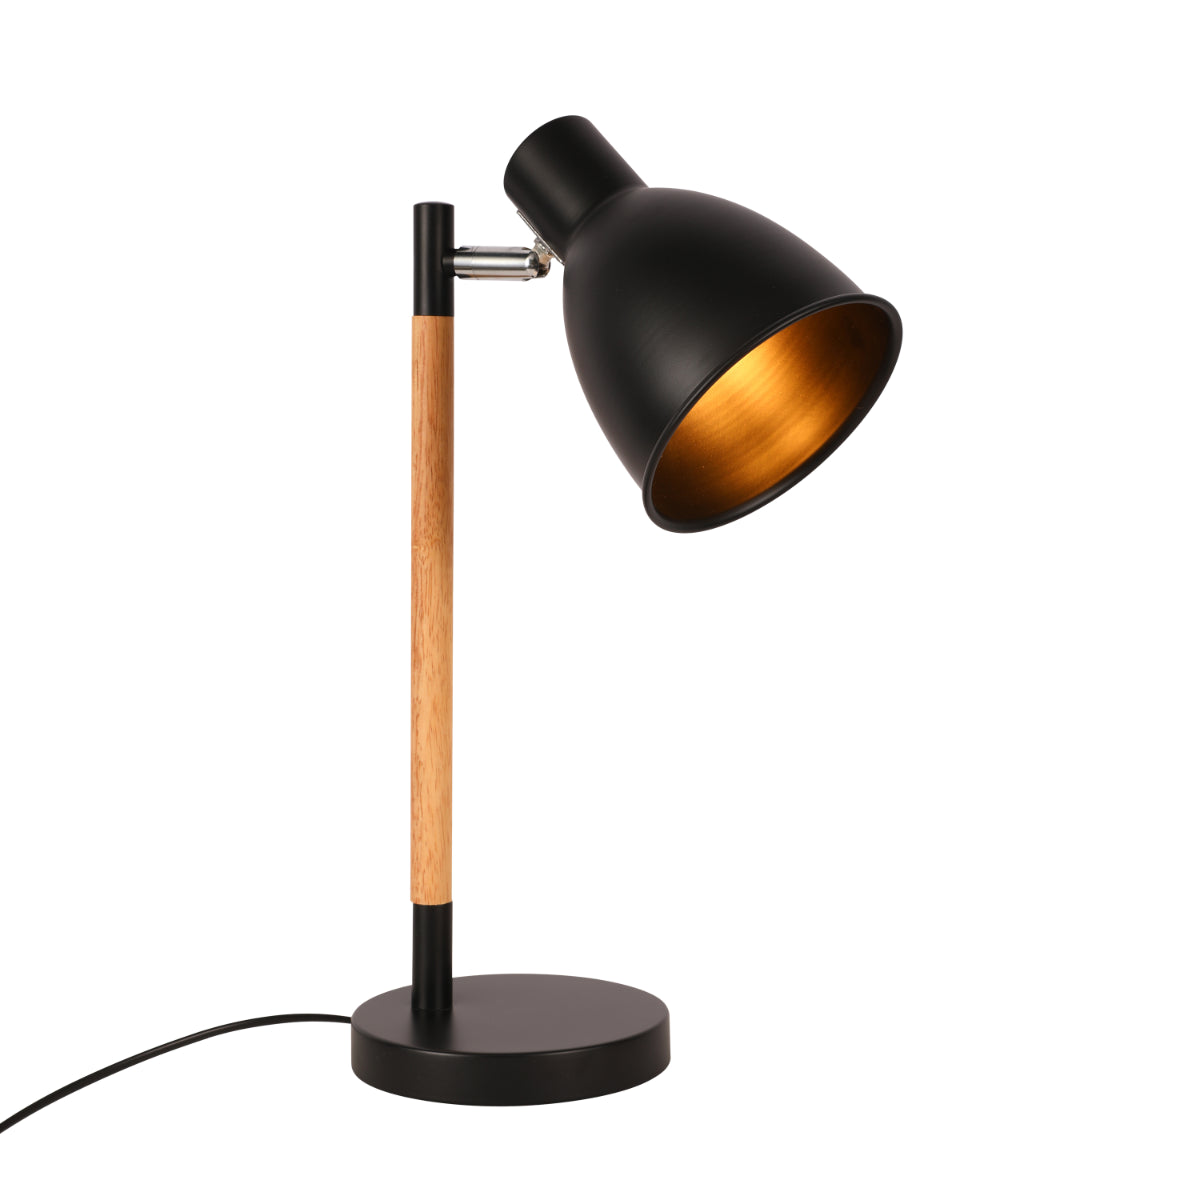 Main image of Nordic Elegance Desk Lamp with Dominant Wood Feature 130-03644